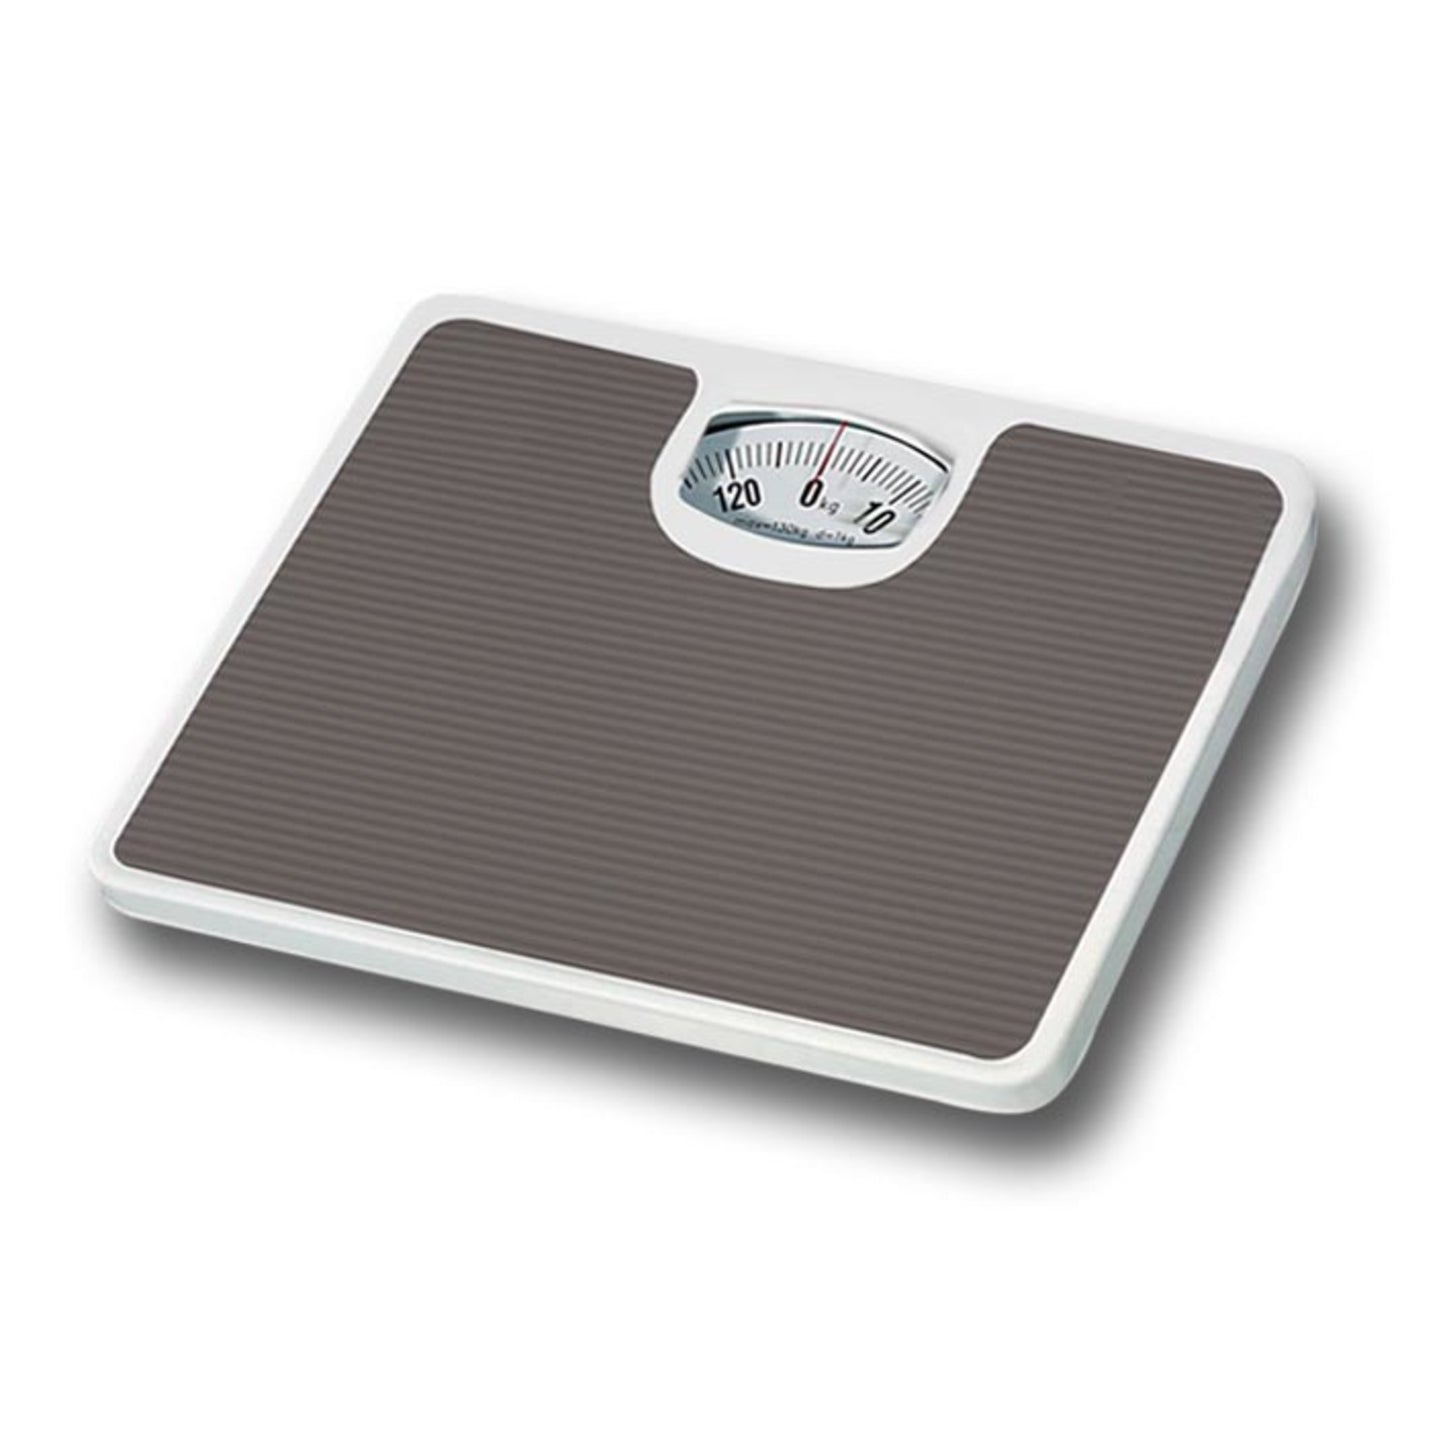 Classic Step On 280 lb Capacity Non-Skid Personal Body Weighing Mechanical  Bath Scale, BATH ORGANIZATION